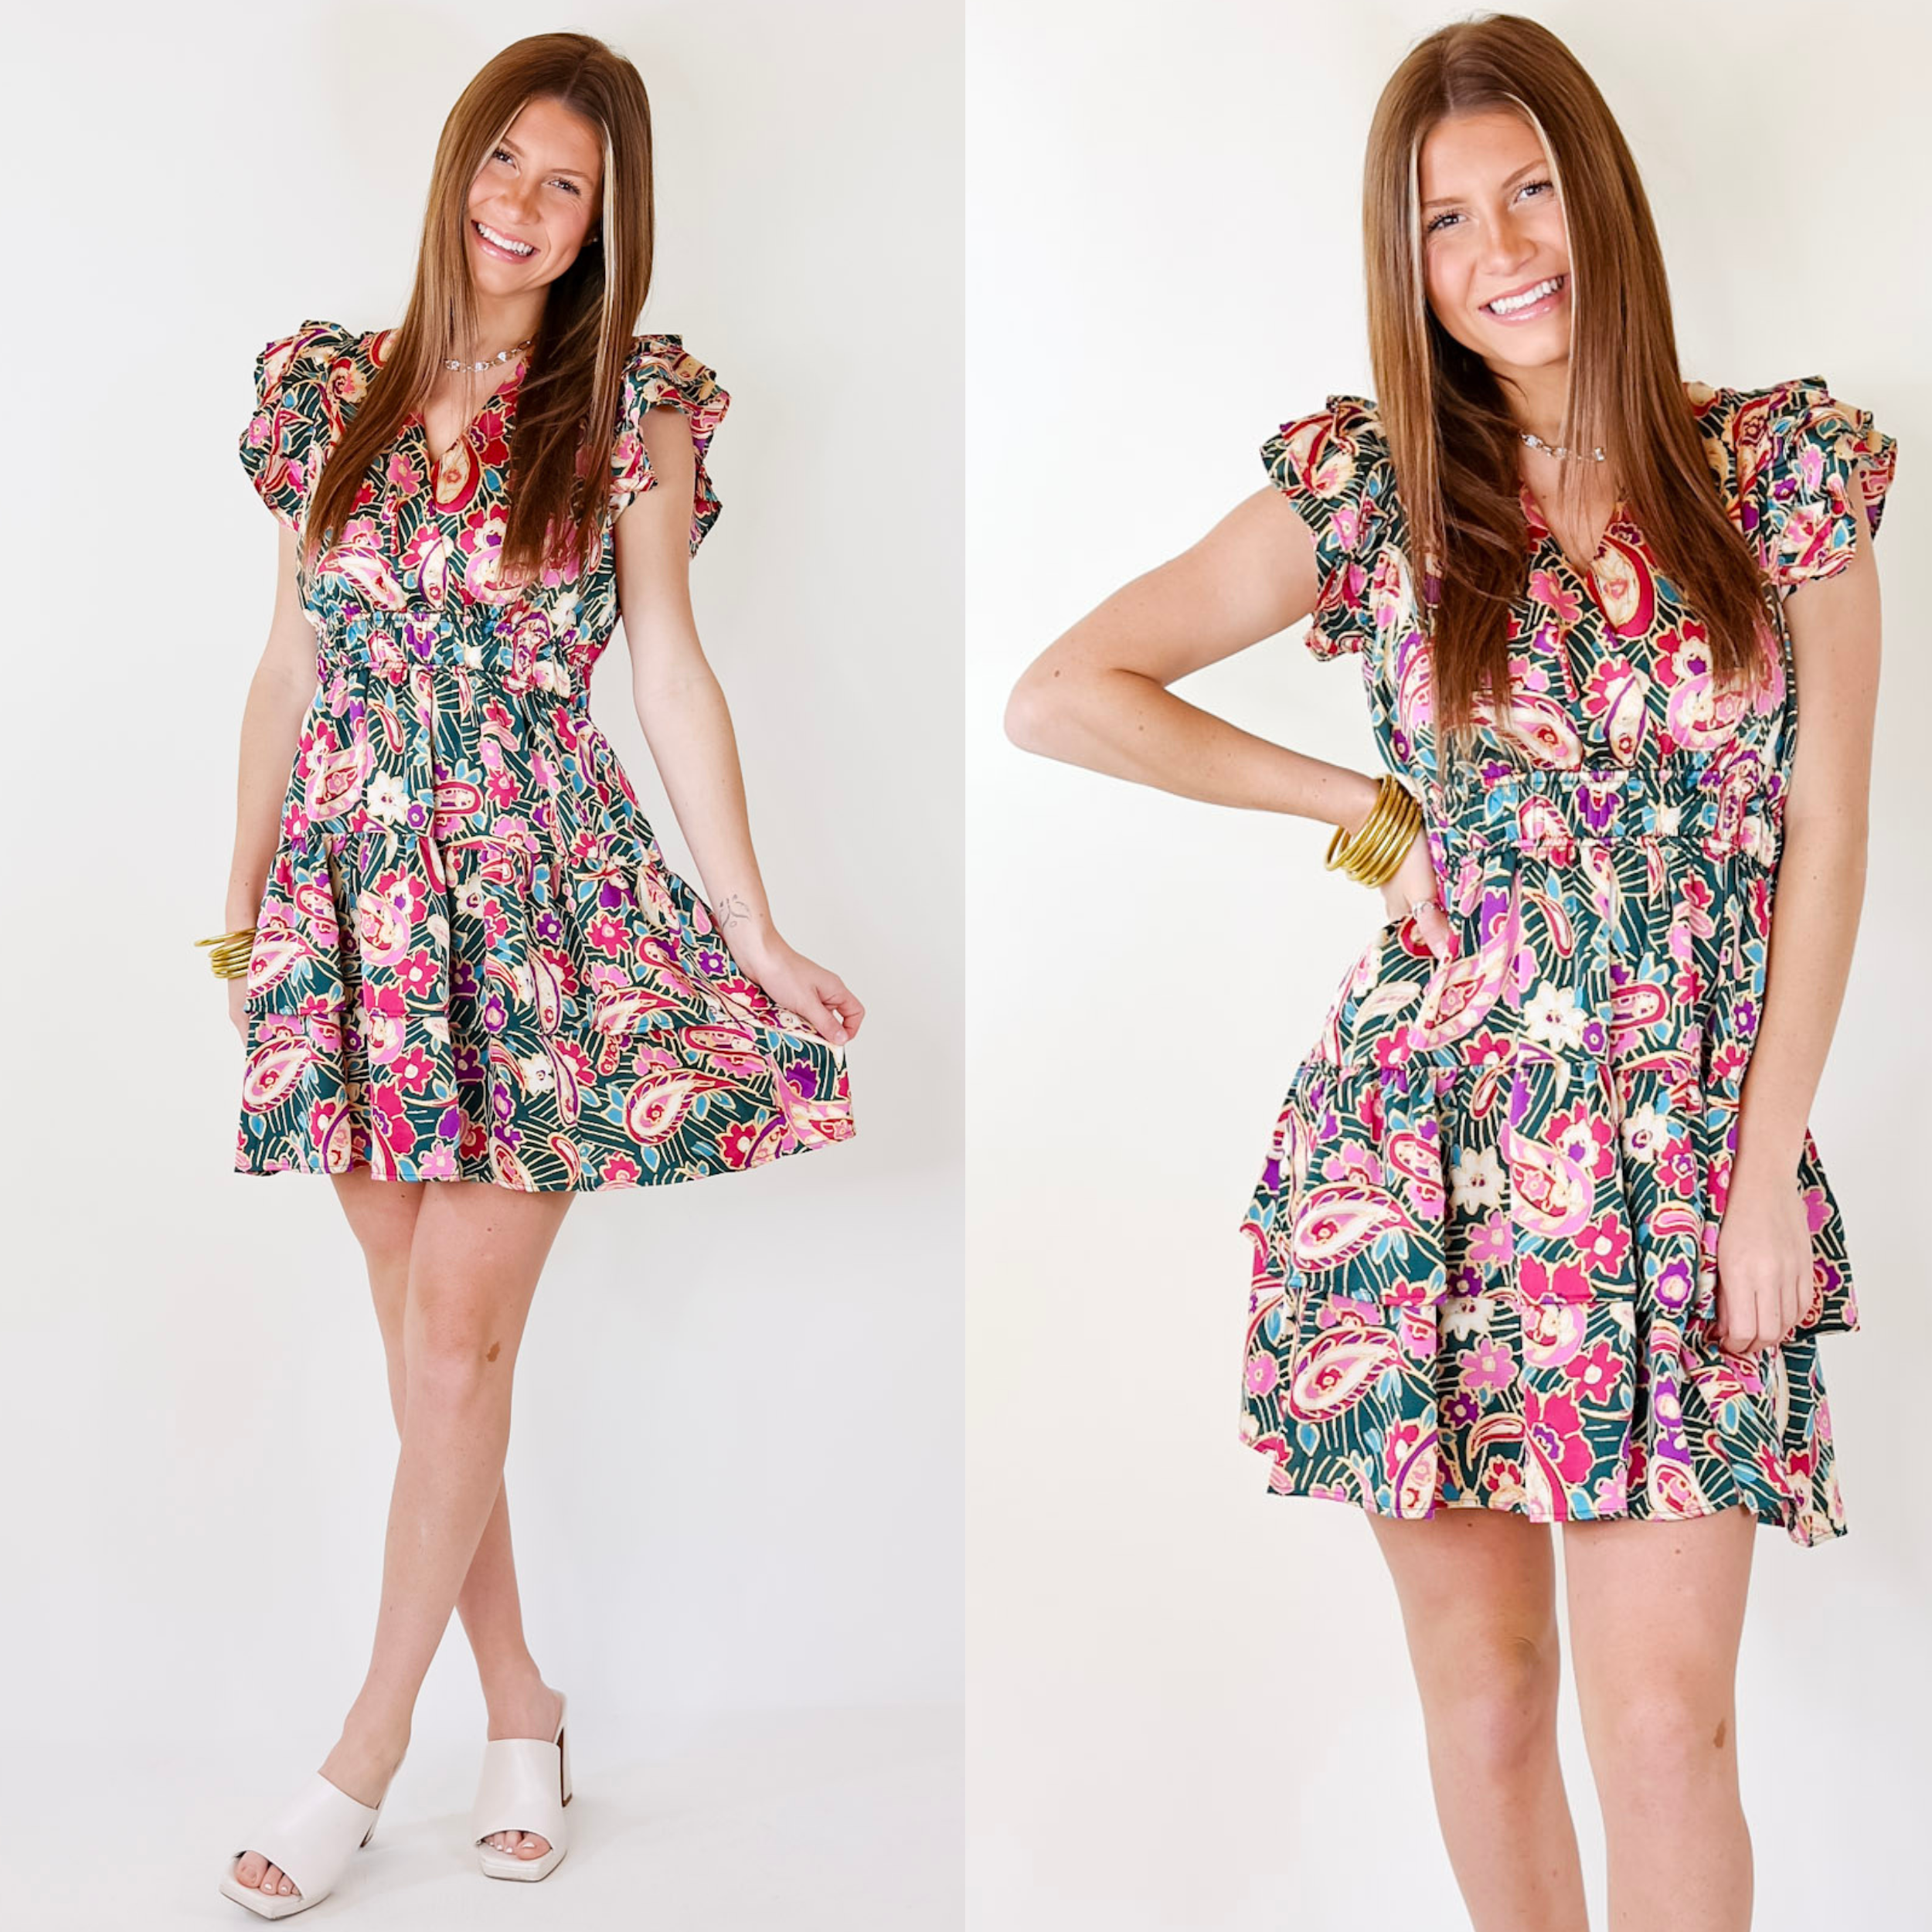 The Perfect Night Floral Ruffle Cap Sleeve Dress in Dark Teal Green - Giddy Up Glamour Boutique